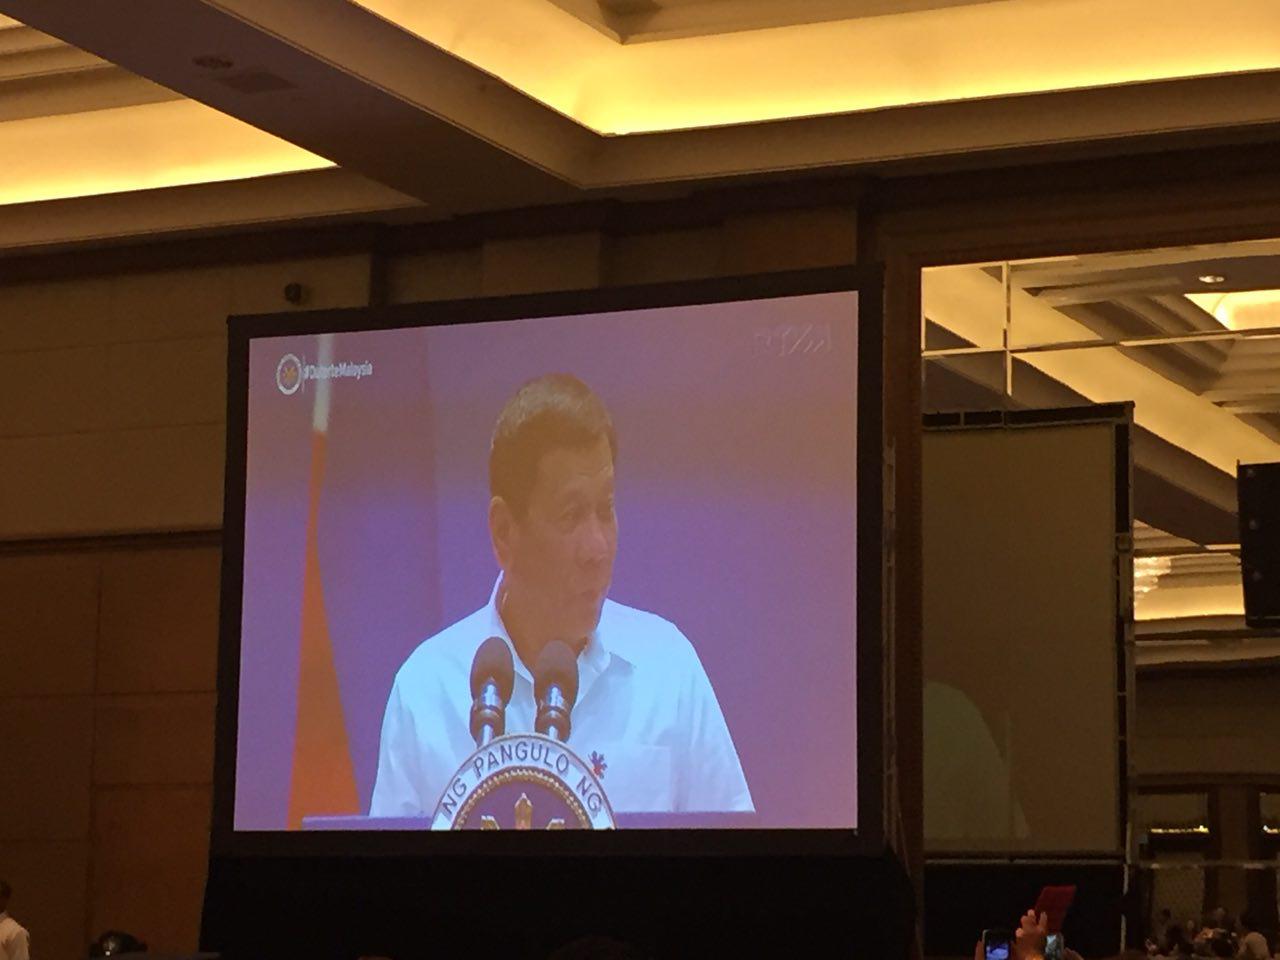 President Duterte as seen on a big screen as he is delivering his speech at the Mandarin Hotel in Kuala Lumpur, Malaysia. (Photo from Eagle News Service Malaysia)